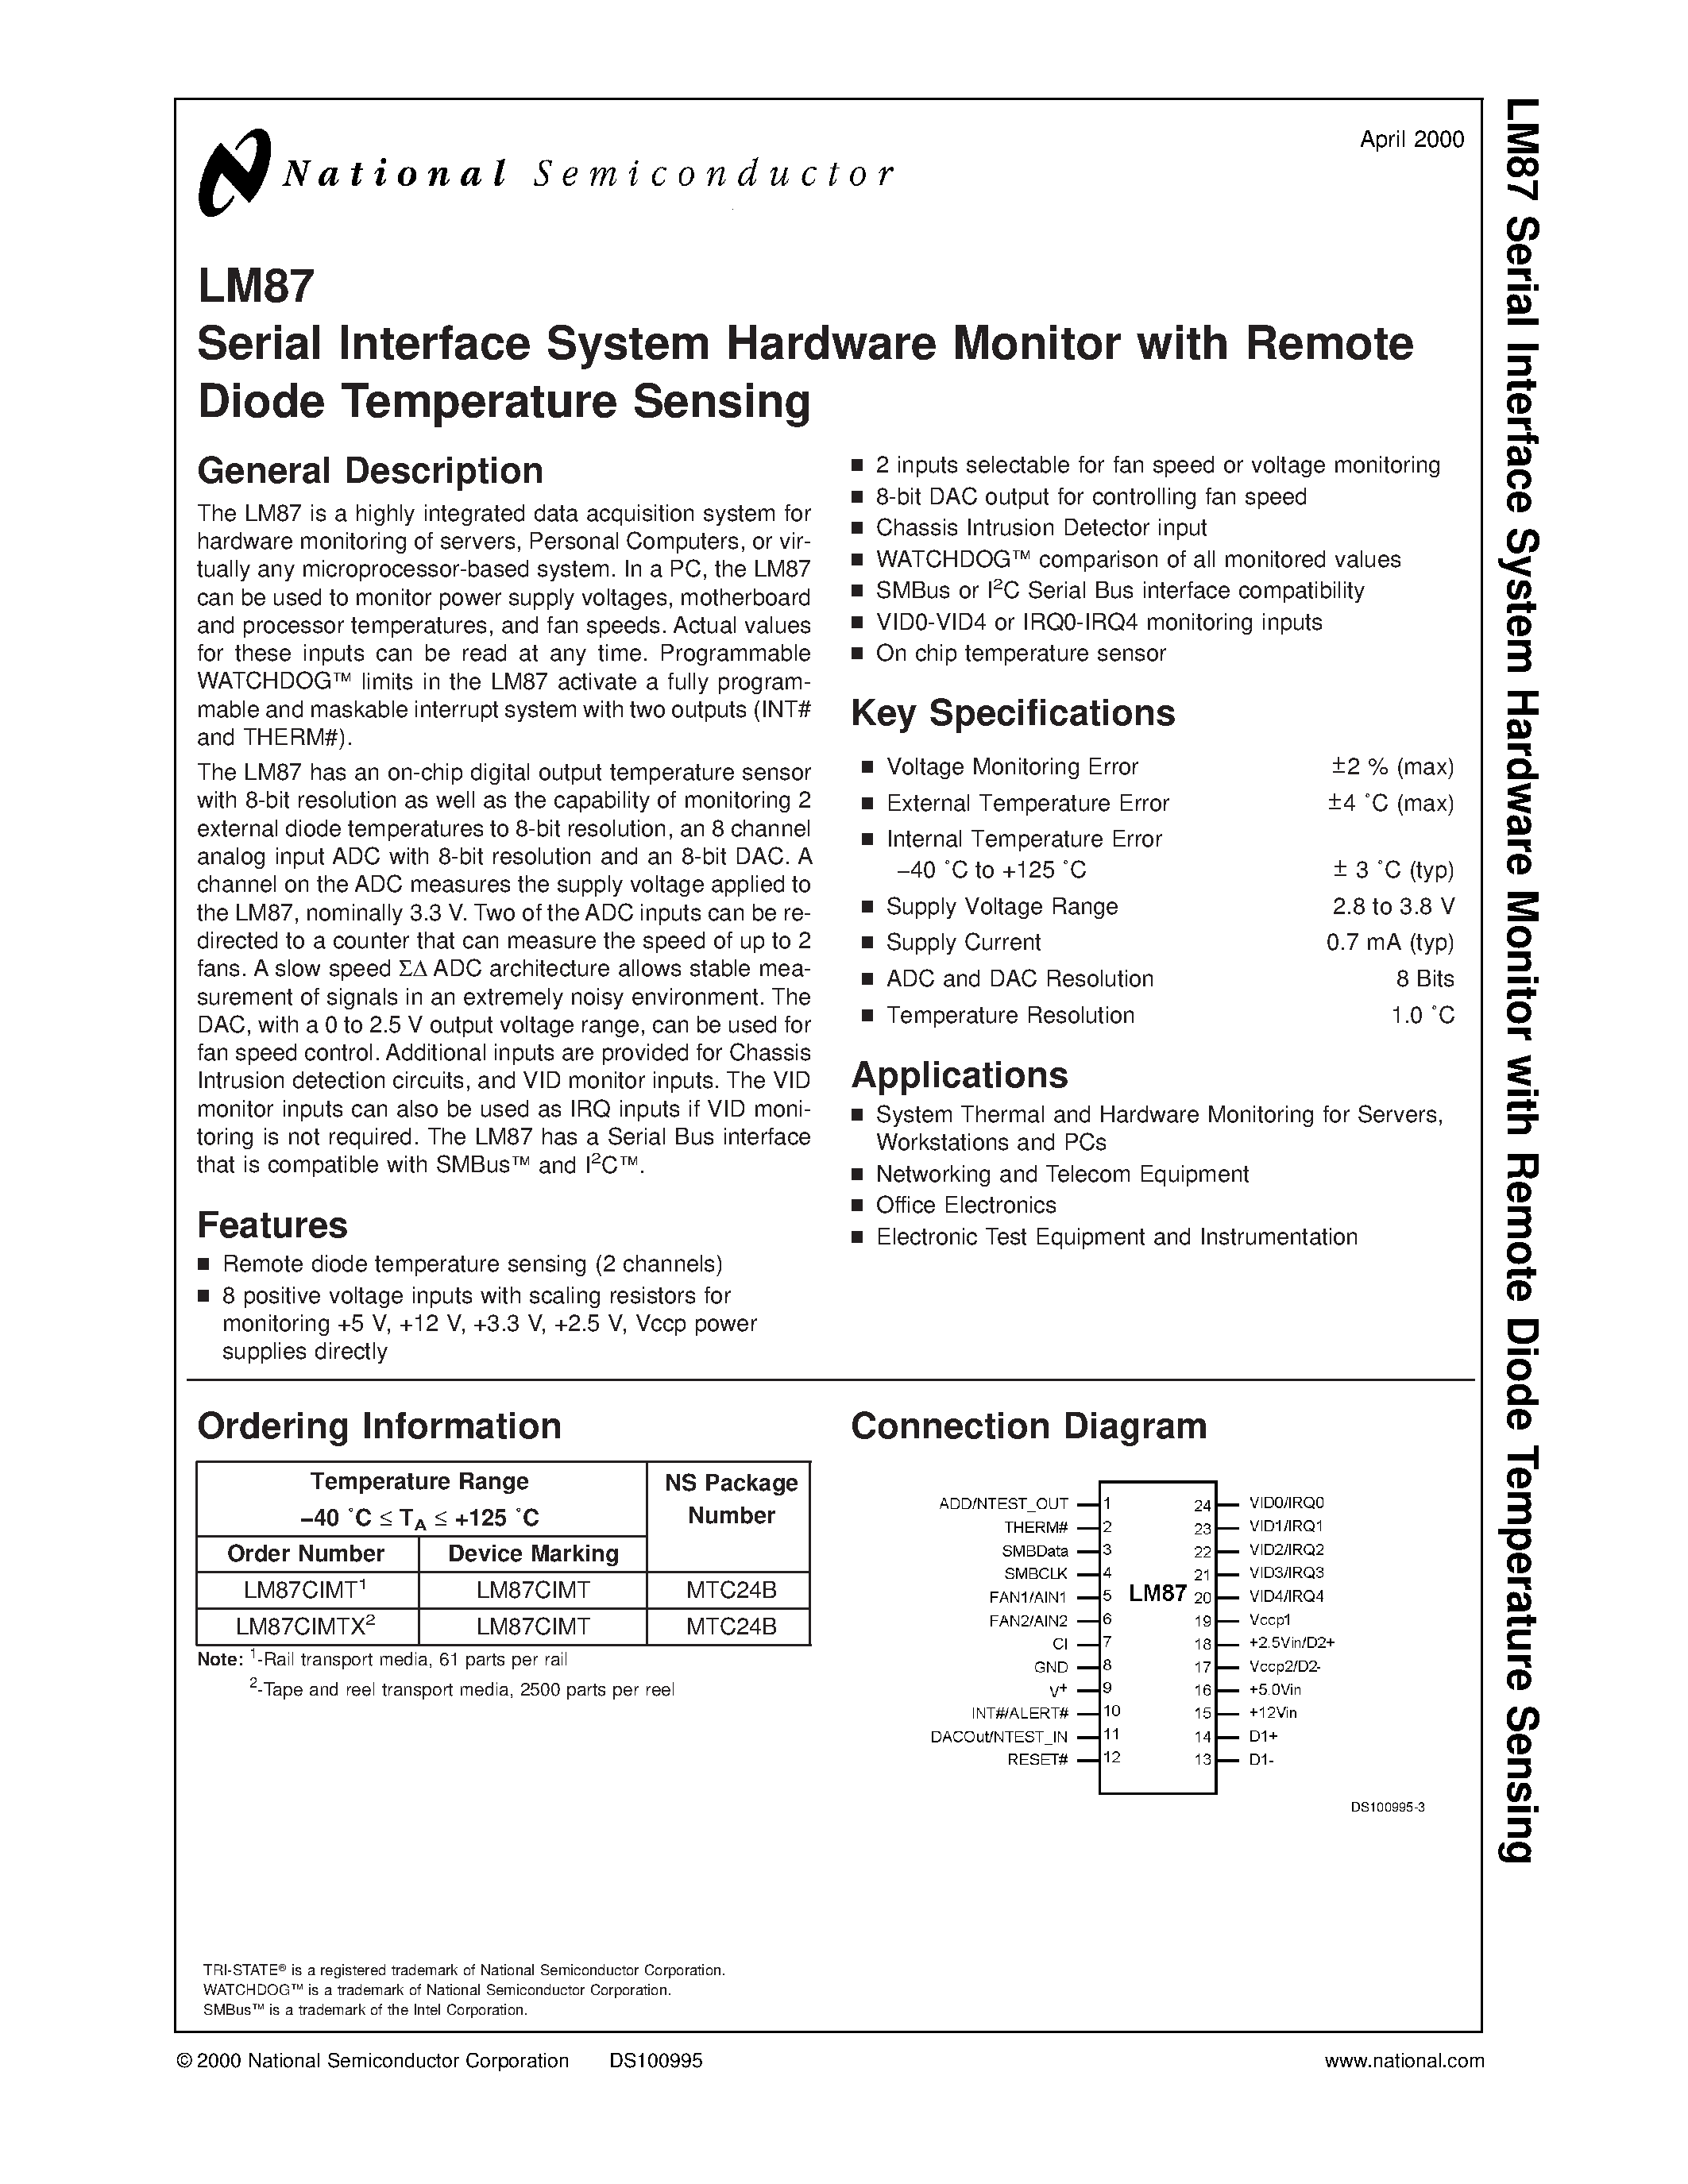 Datasheet LM87CIMT1 - Serial Interface System Hardware Monitor with Remote Diode Temperature Sensing page 1